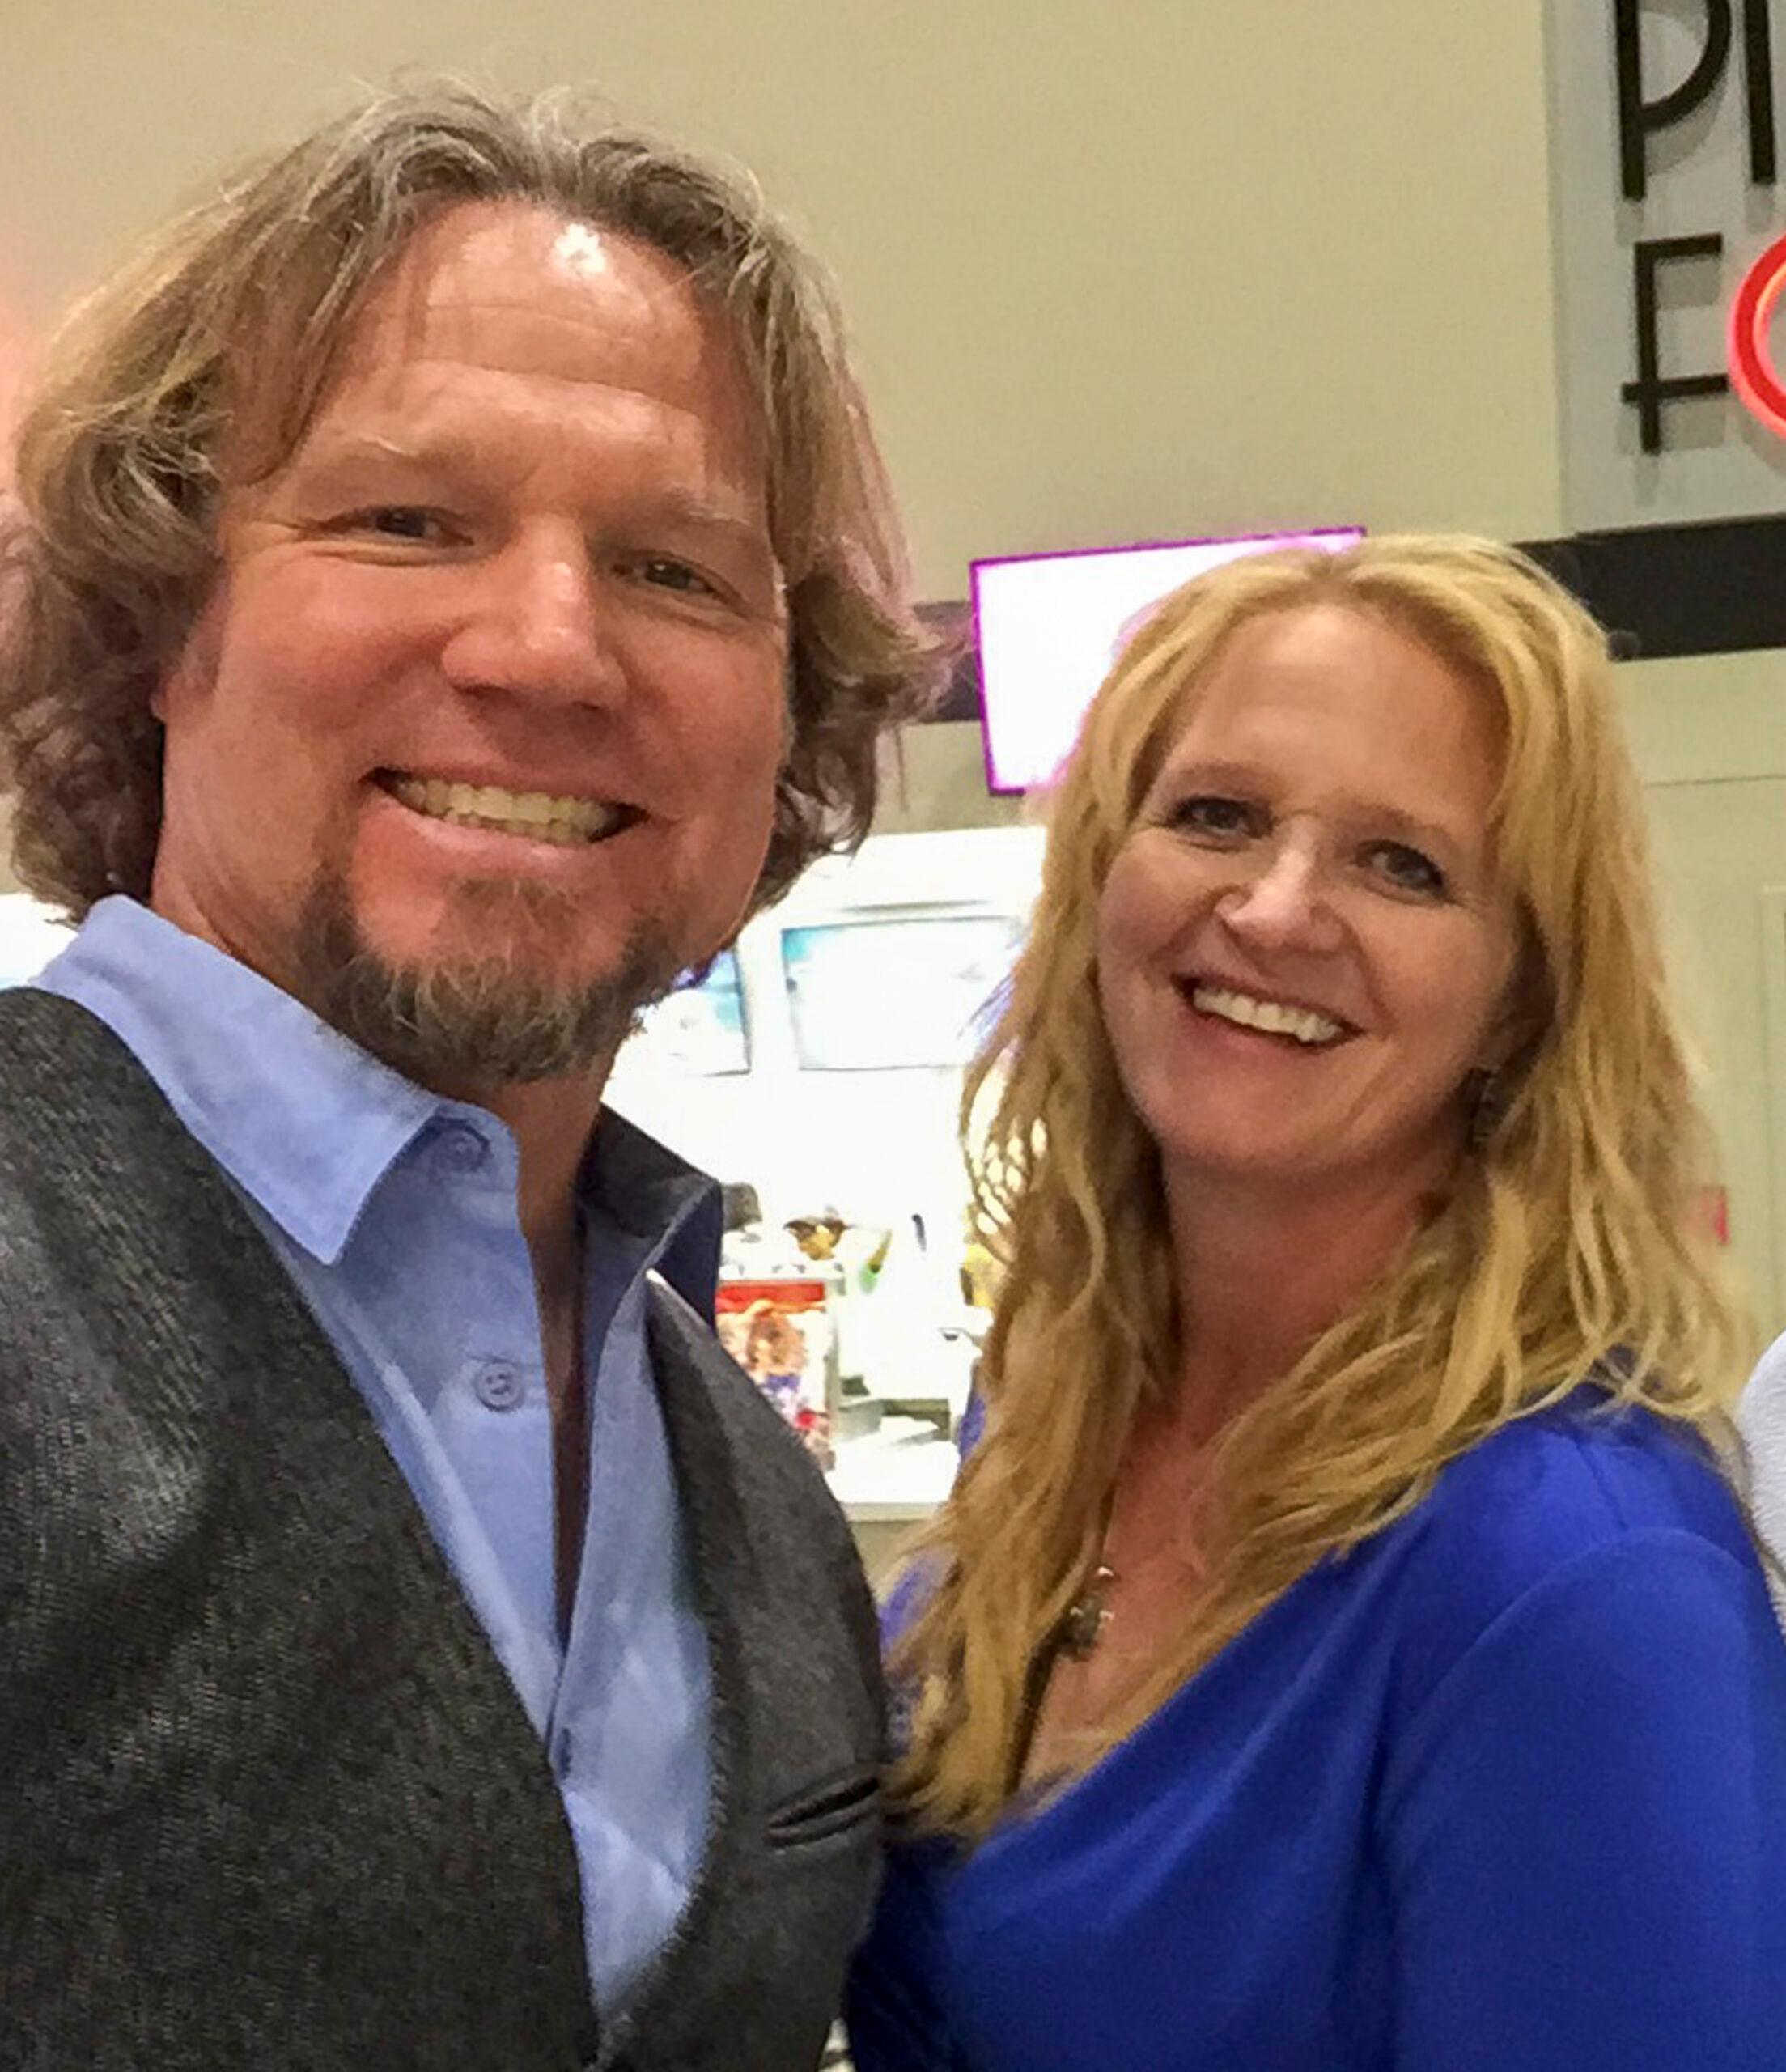 'Sisterwives' Kody and Christine Brown attend opening of T-Mobile arena